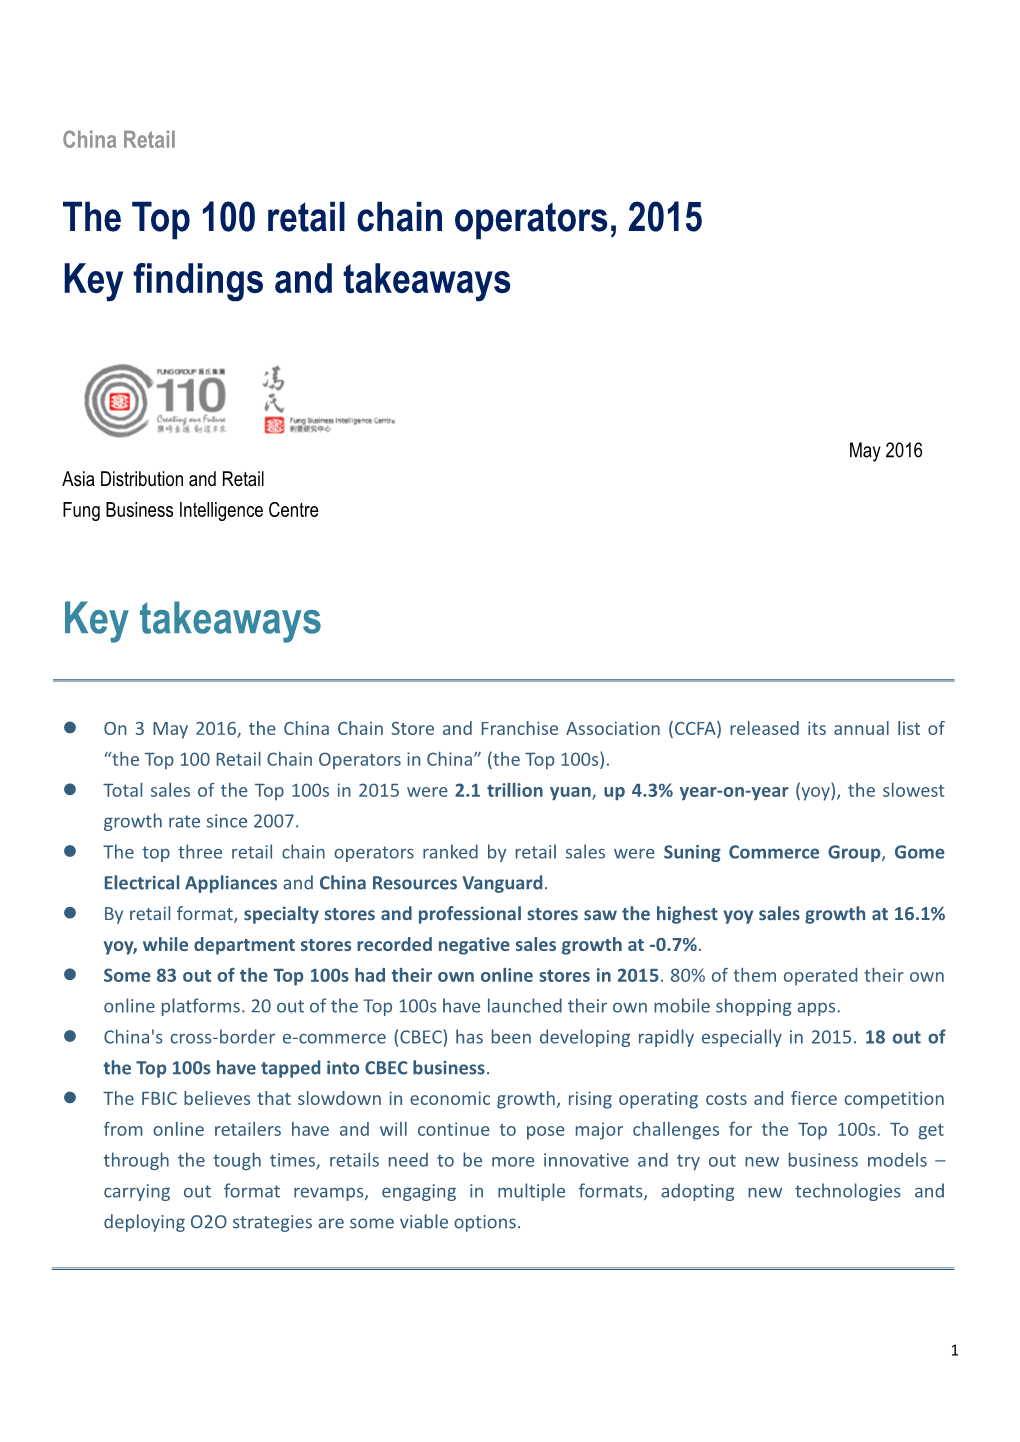 The Top 100 Retail Chain Operators, 2015 Key Findings and Takeaways